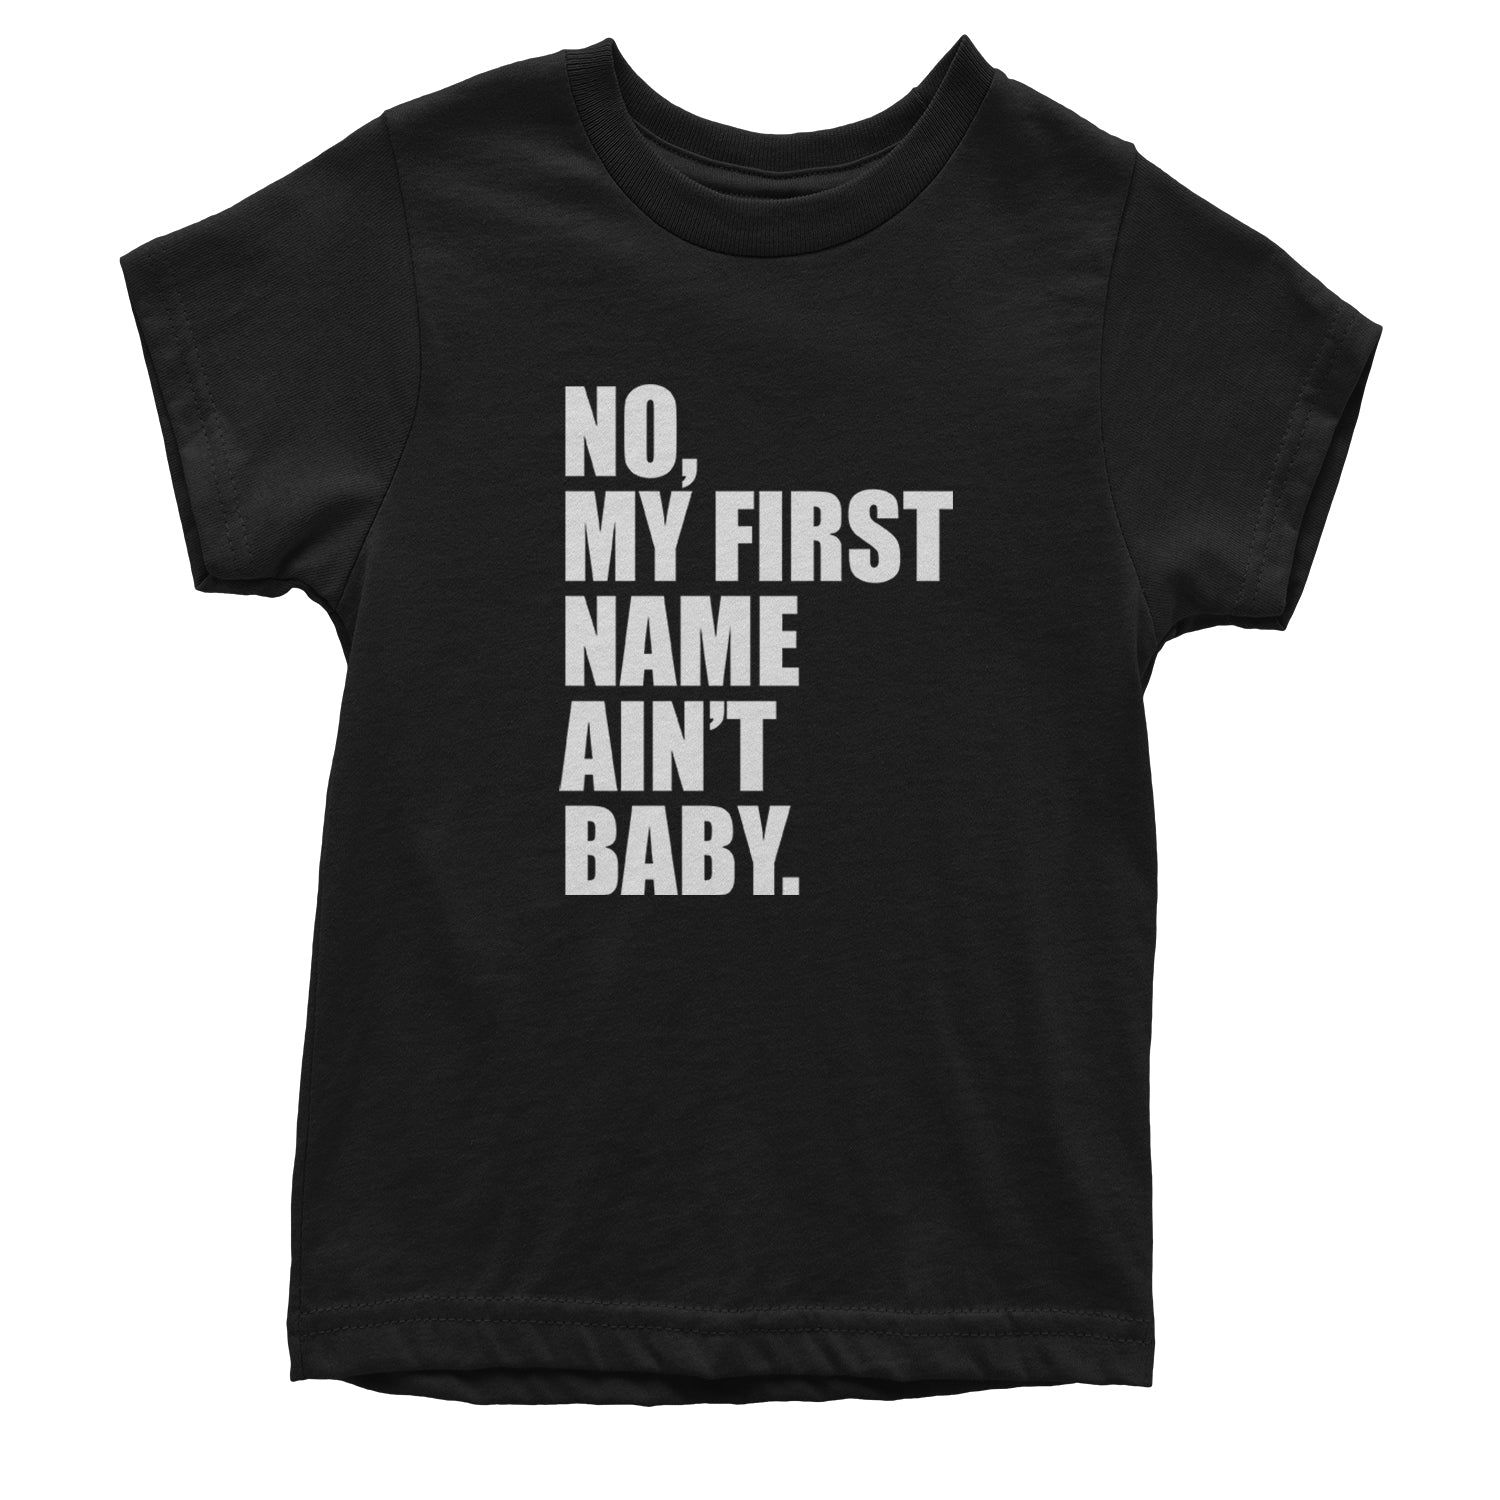 No My First Name Ain't Baby Together Again Youth T-shirt